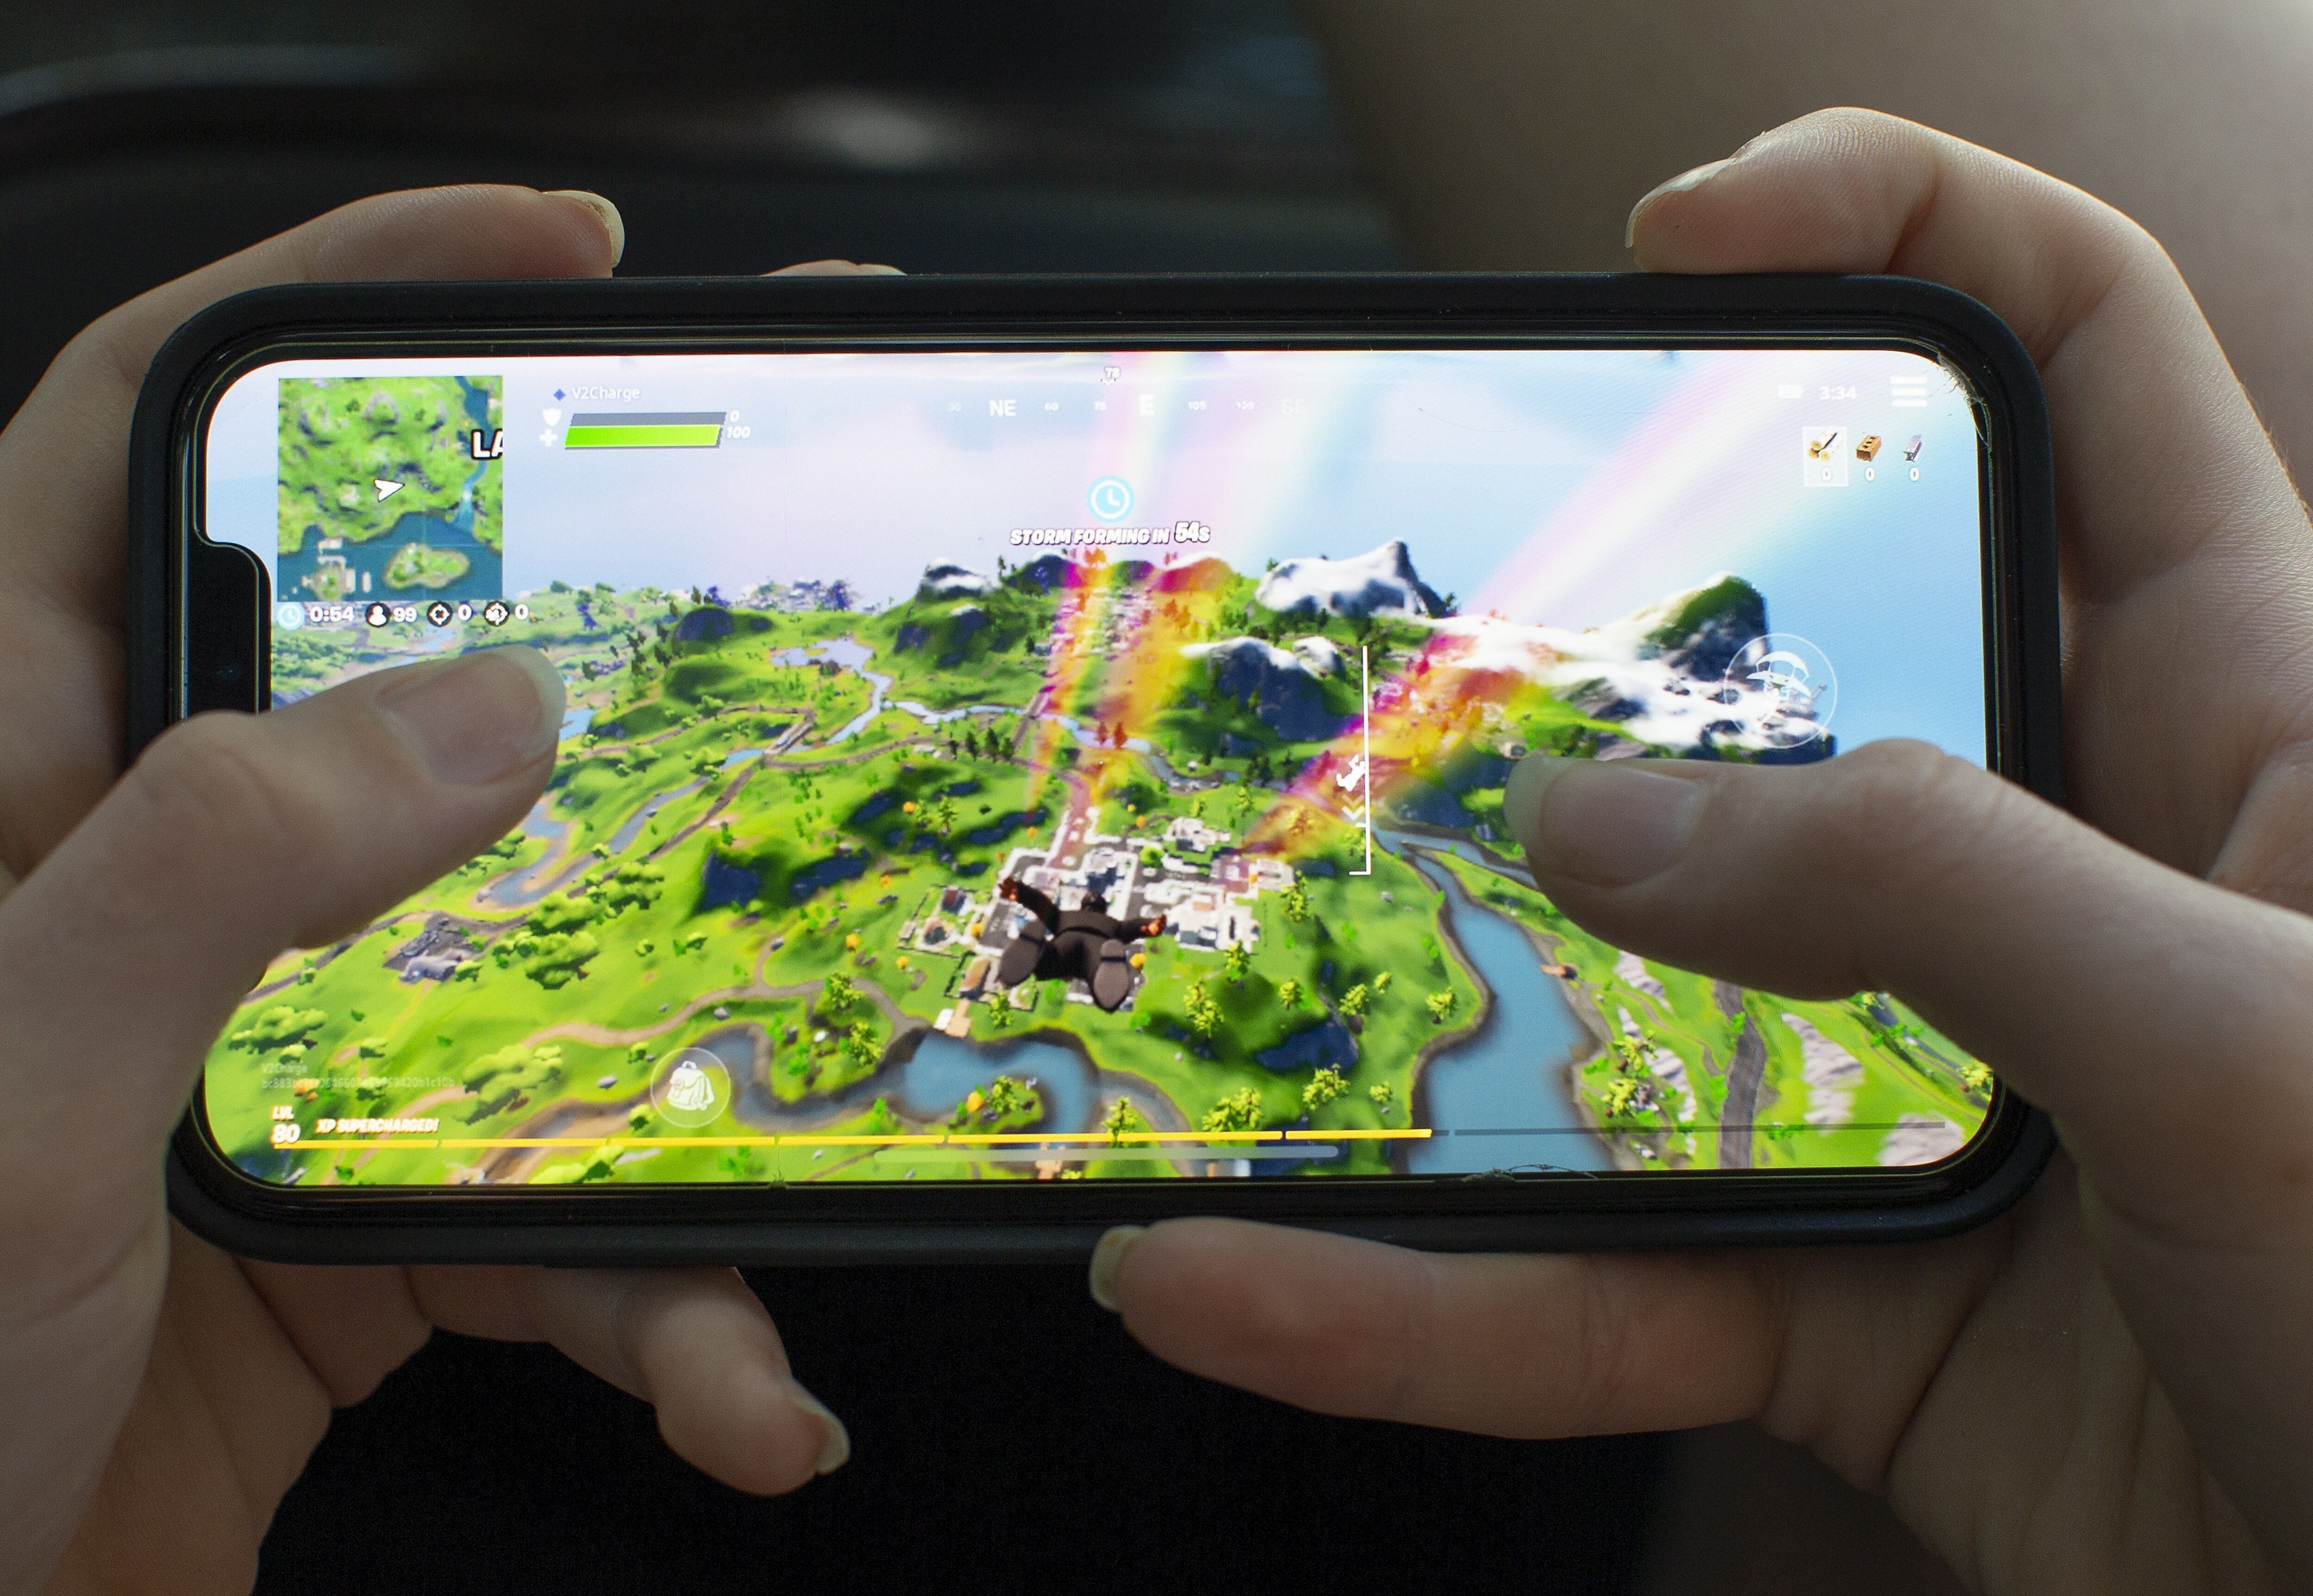 Fortnite is one of the biggest video games in the world, and Tencent owns 40 per cent of the developer behind it, Epic Games. Photo: EPA-EFE